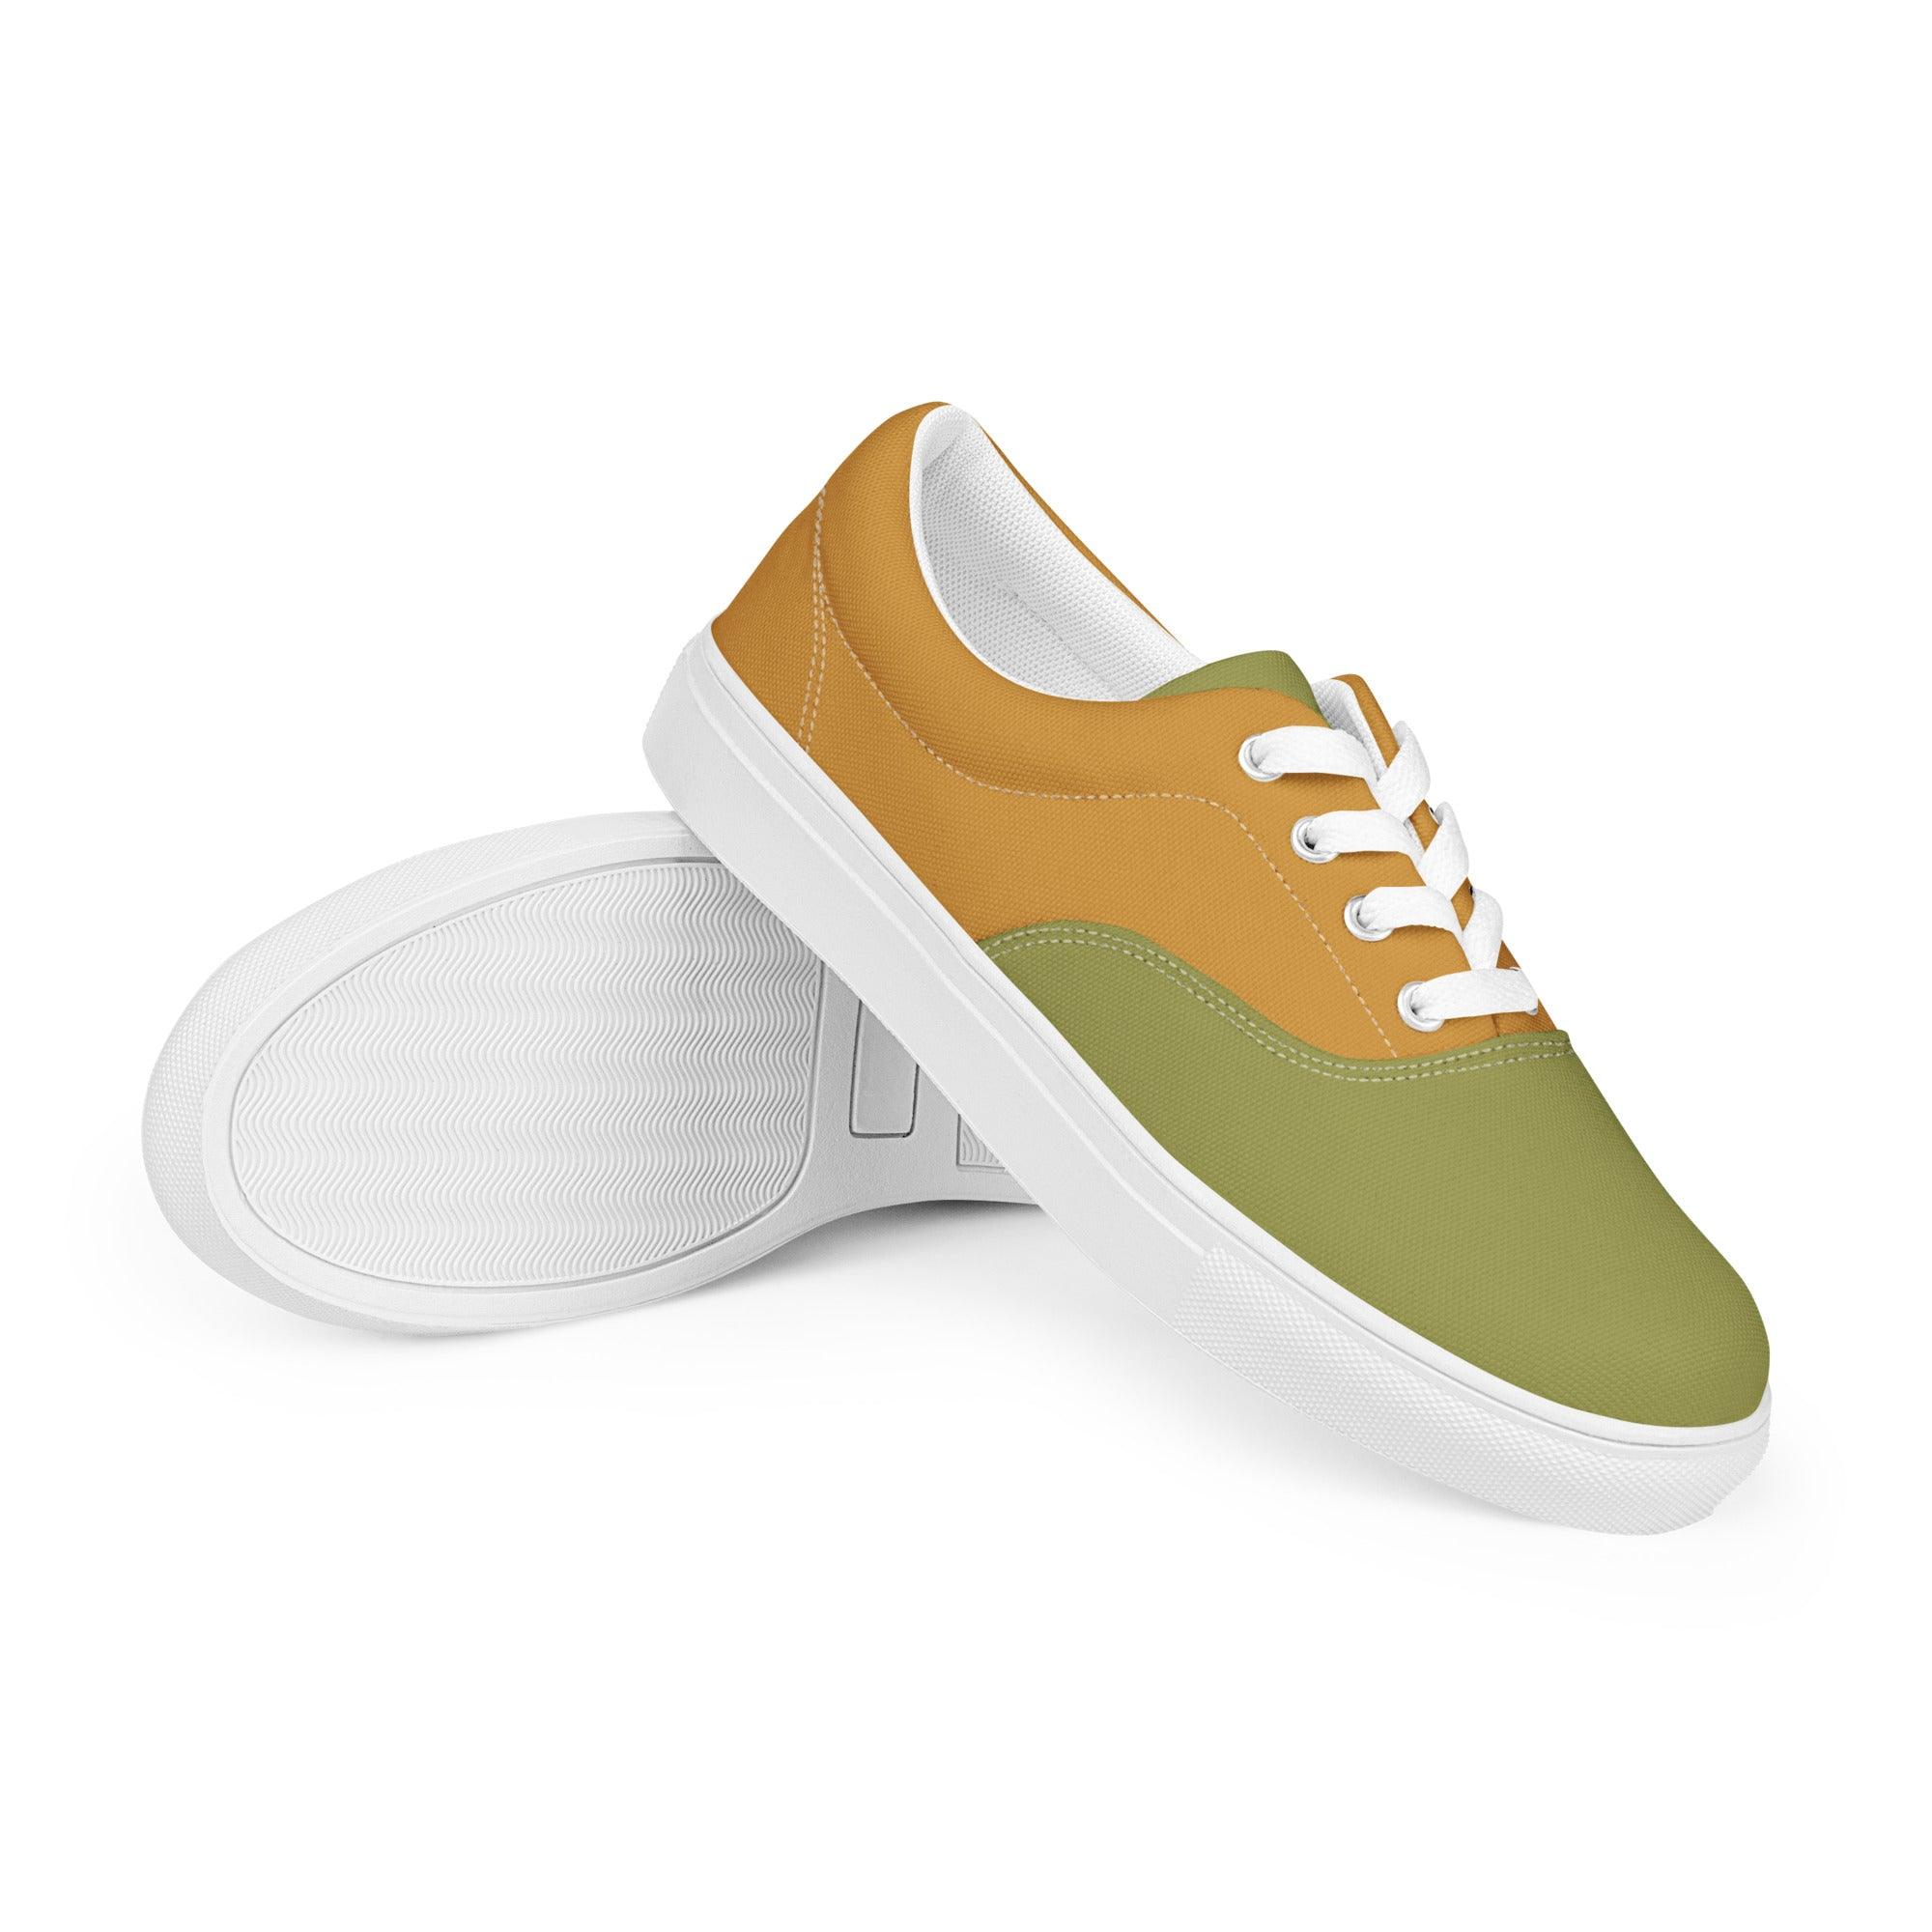 Jana Color Block Lace Up Canvas Sneakers - Blissfully Brand